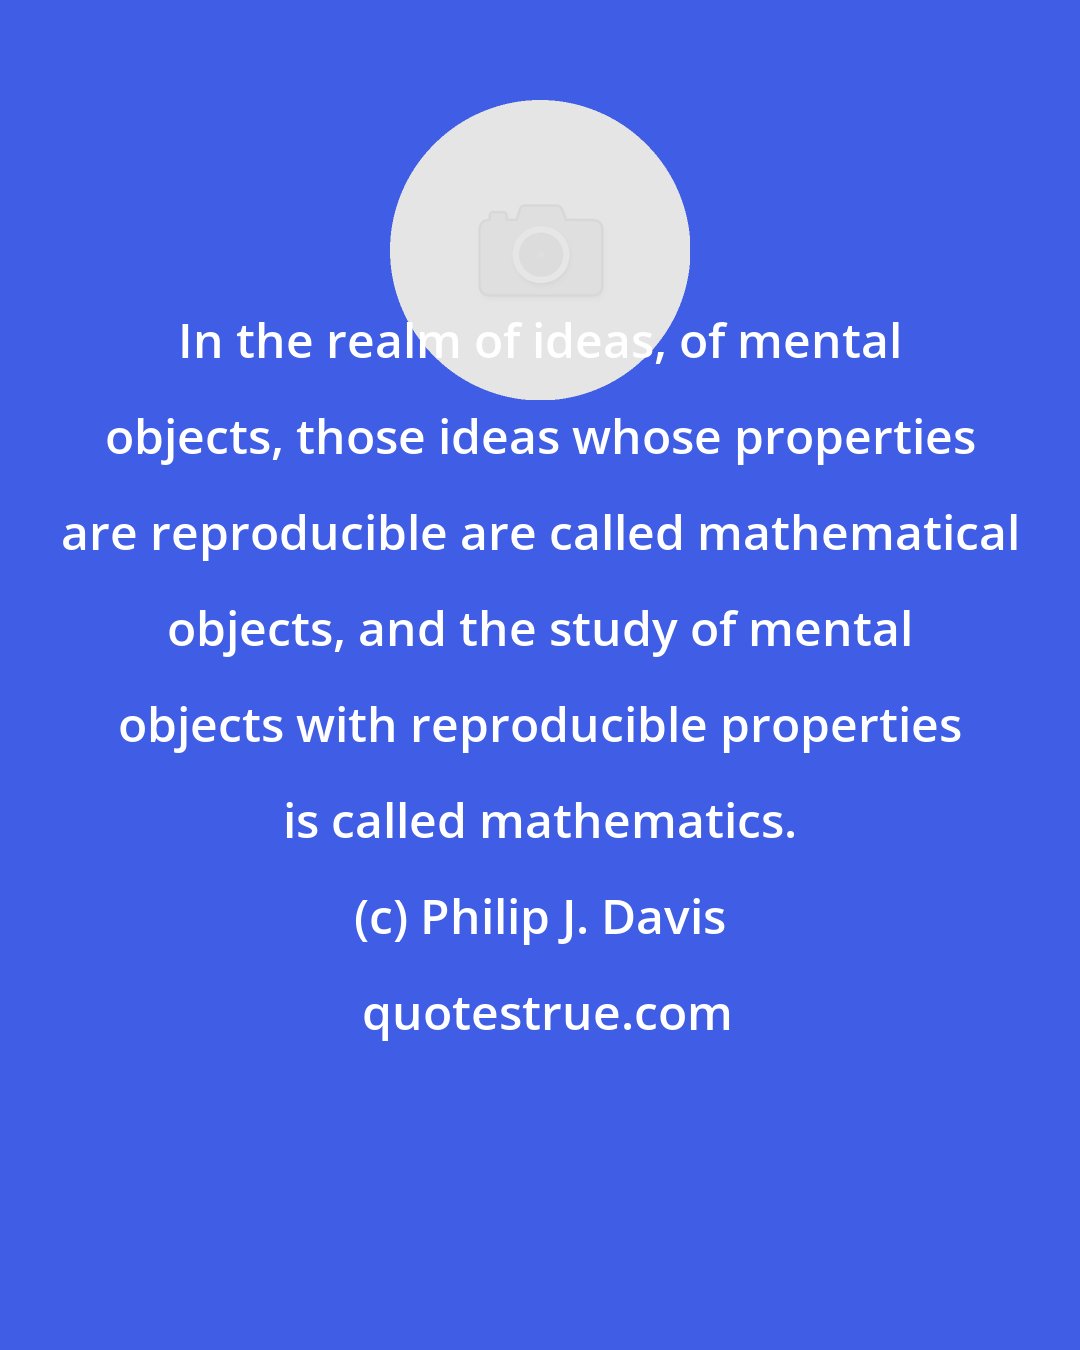 Philip J. Davis: In the realm of ideas, of mental objects, those ideas whose properties are reproducible are called mathematical objects, and the study of mental objects with reproducible properties is called mathematics.